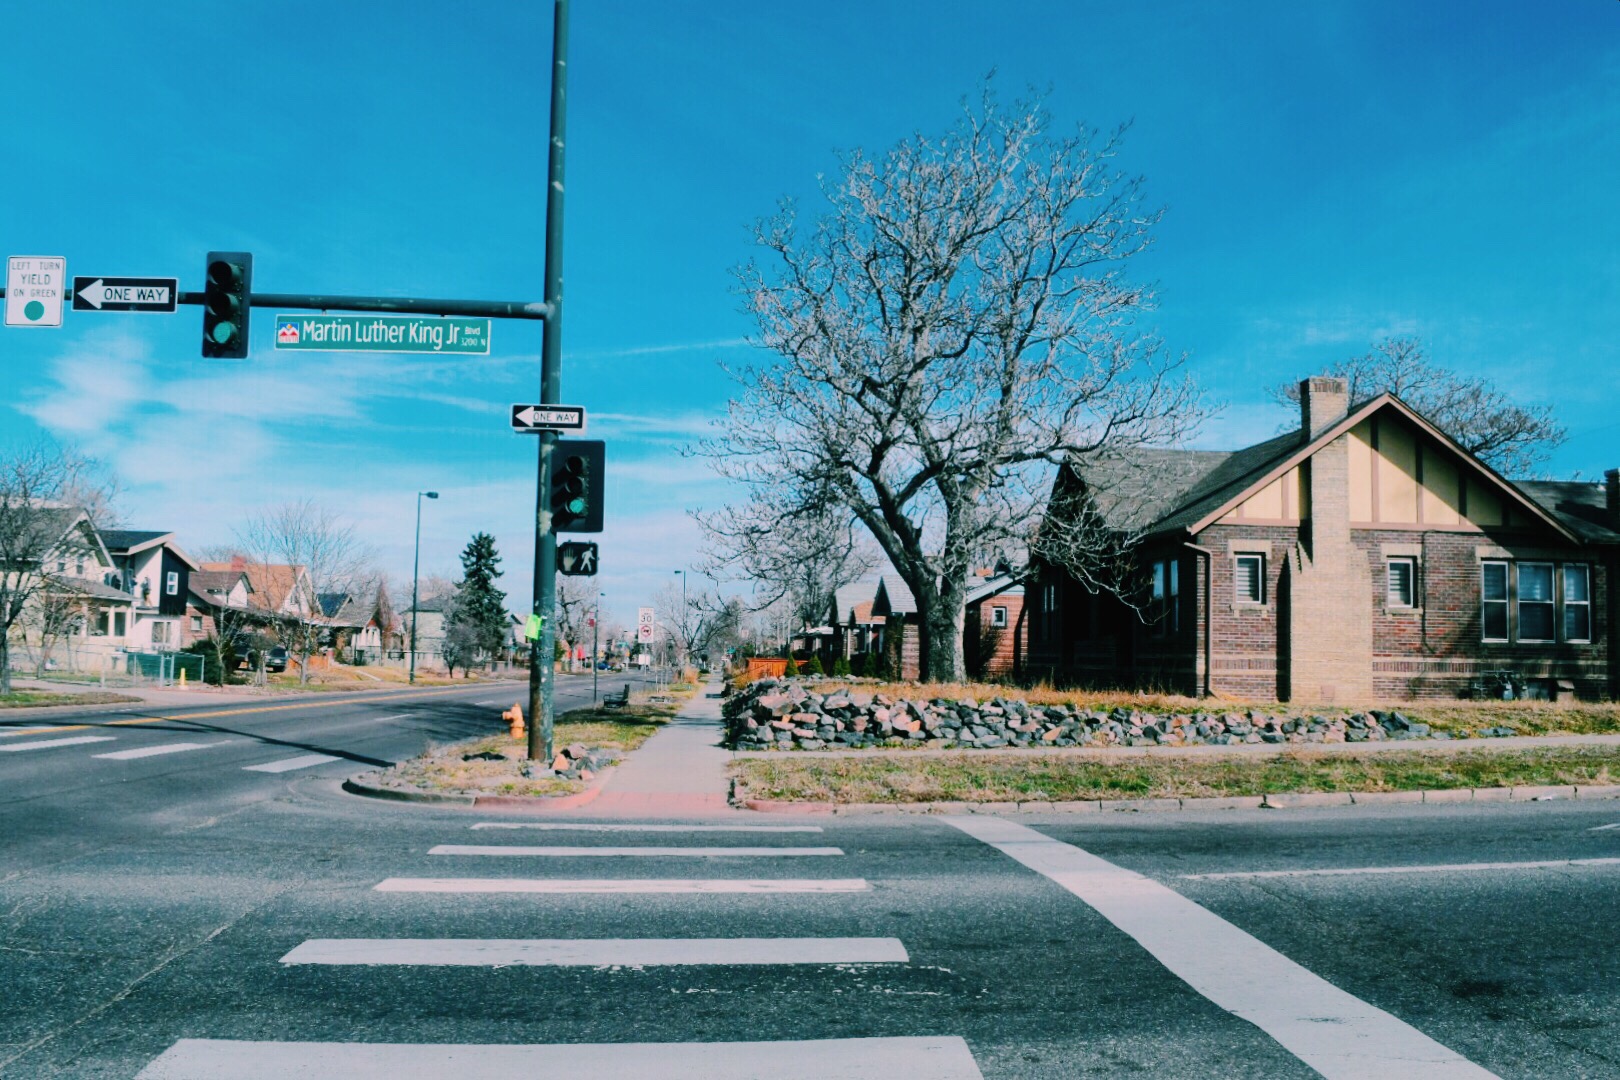 Finding the right Denver neighborhood to call home.